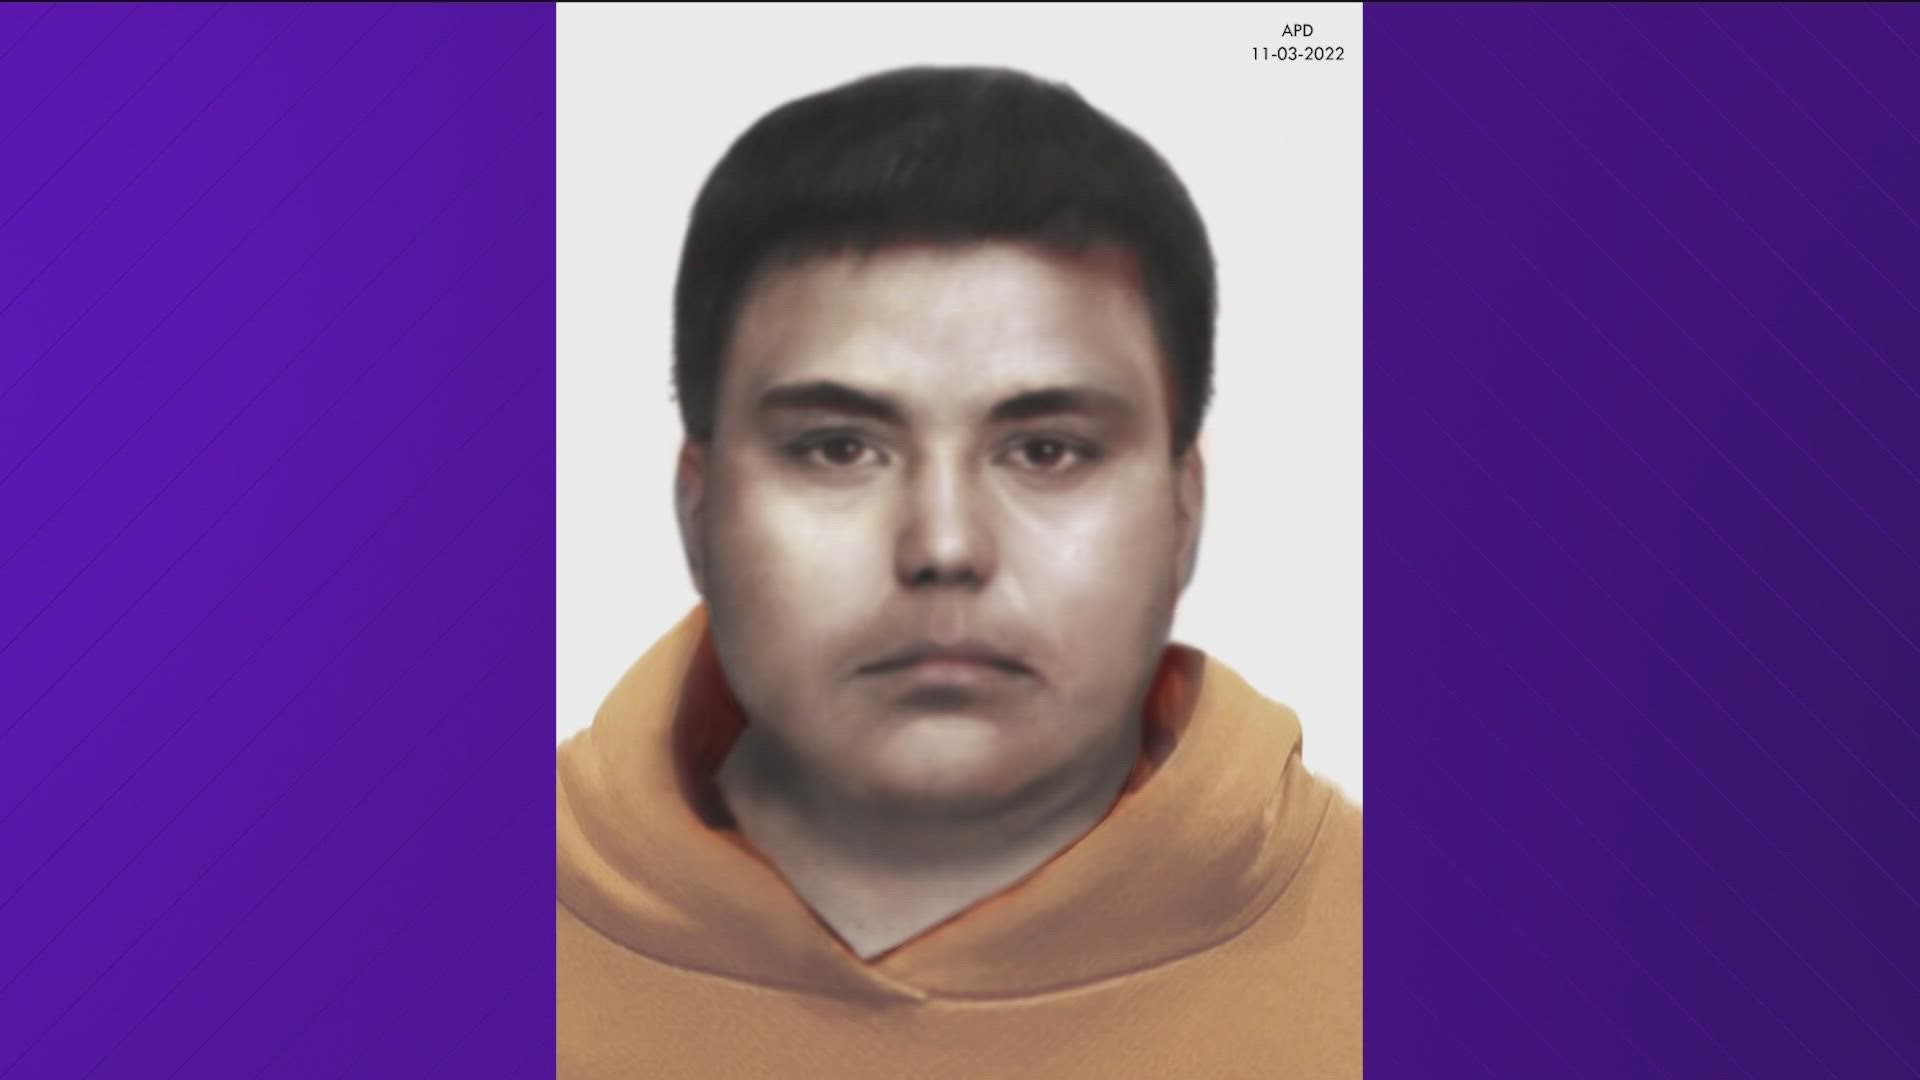 The suspect is wanted for kidnapping a woman near the UT campus.